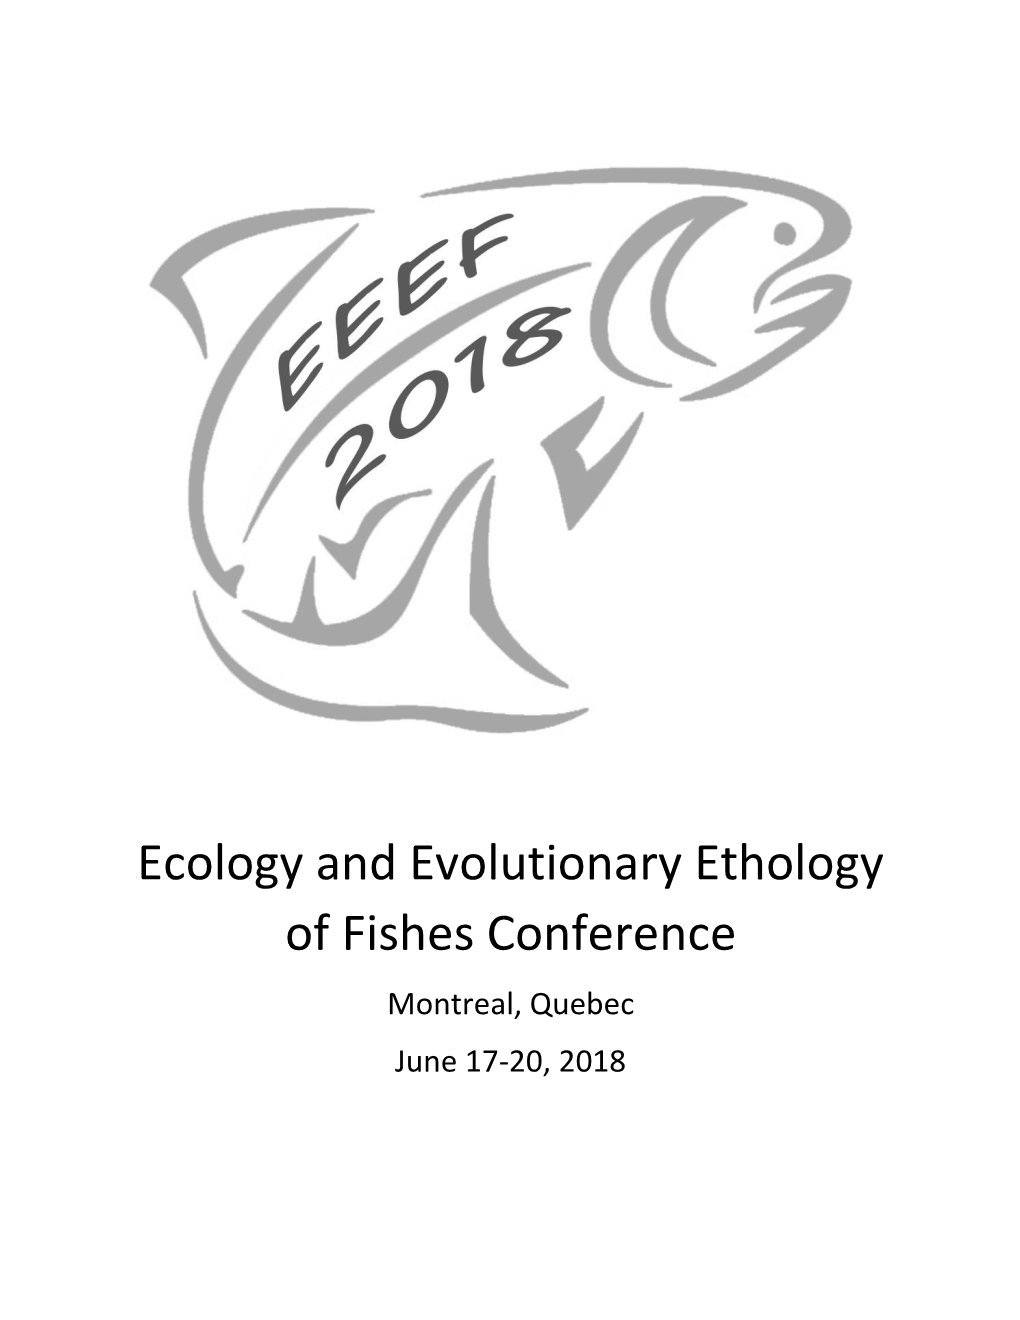 Ecology and Evolutionary Ethology of Fishes Conference